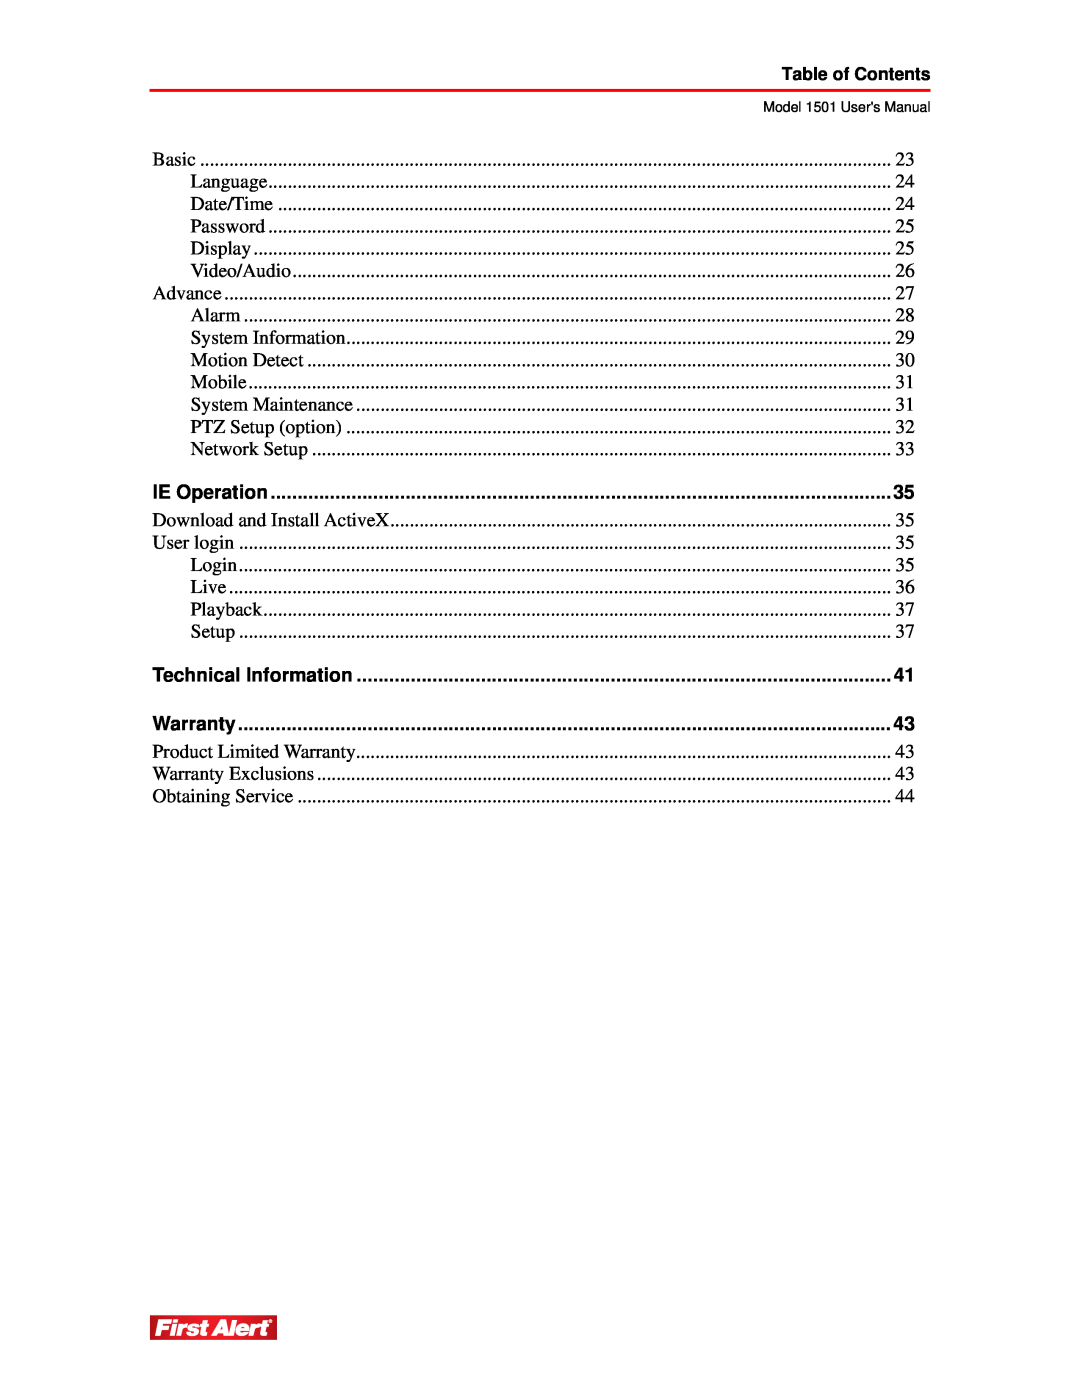 First Alert 1501 user manual Table of Contents 